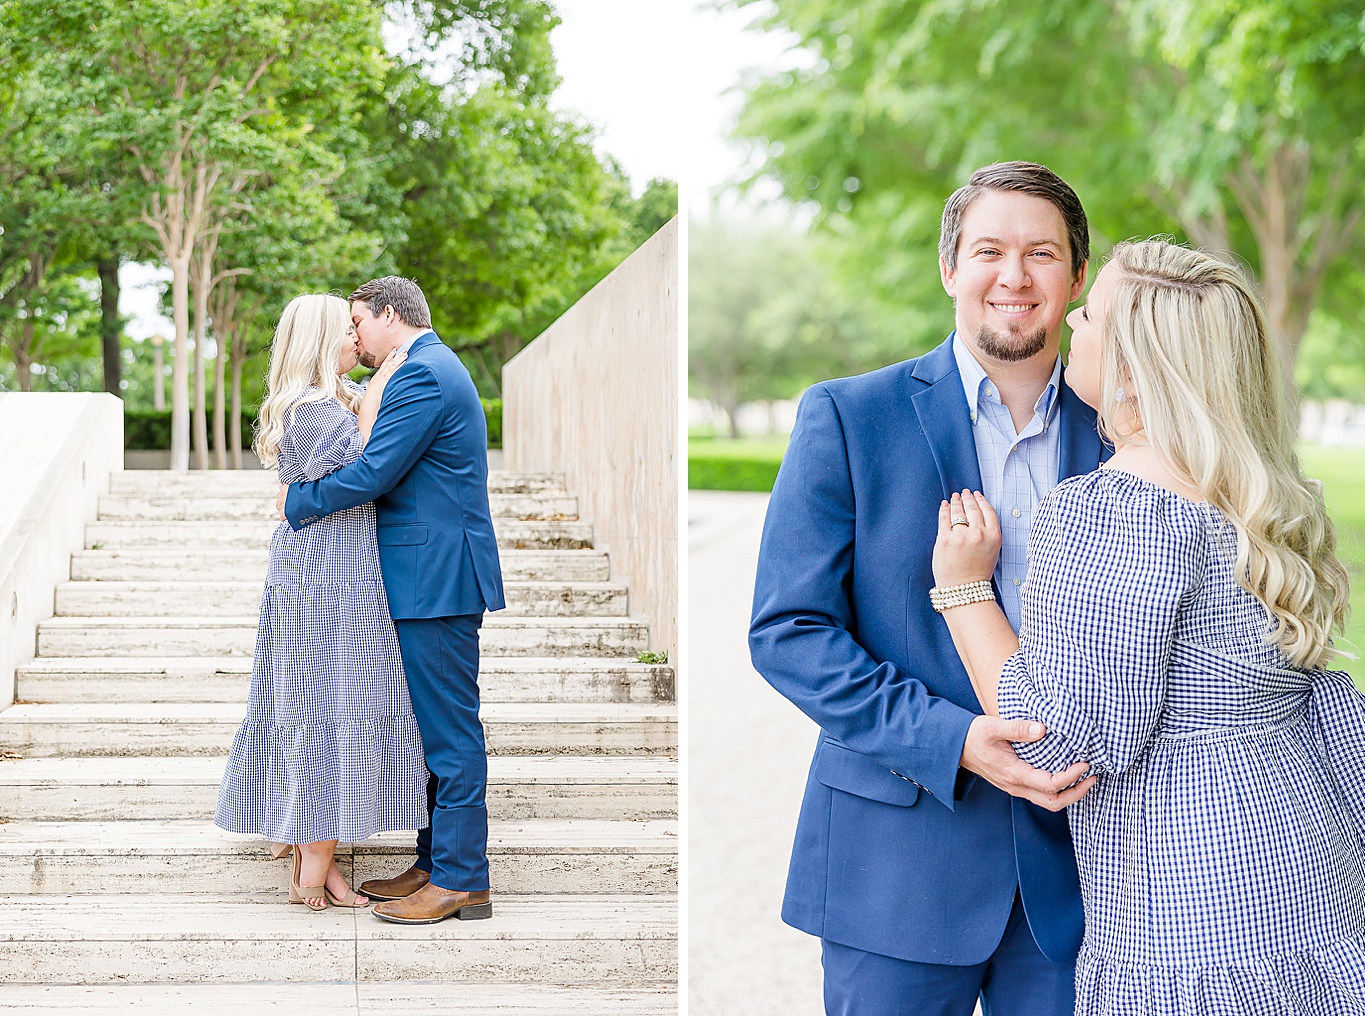 kimbell art museum engagement session, dallas wedding photographer, dallas engagement photographer, engagement session at the kimbell art museum